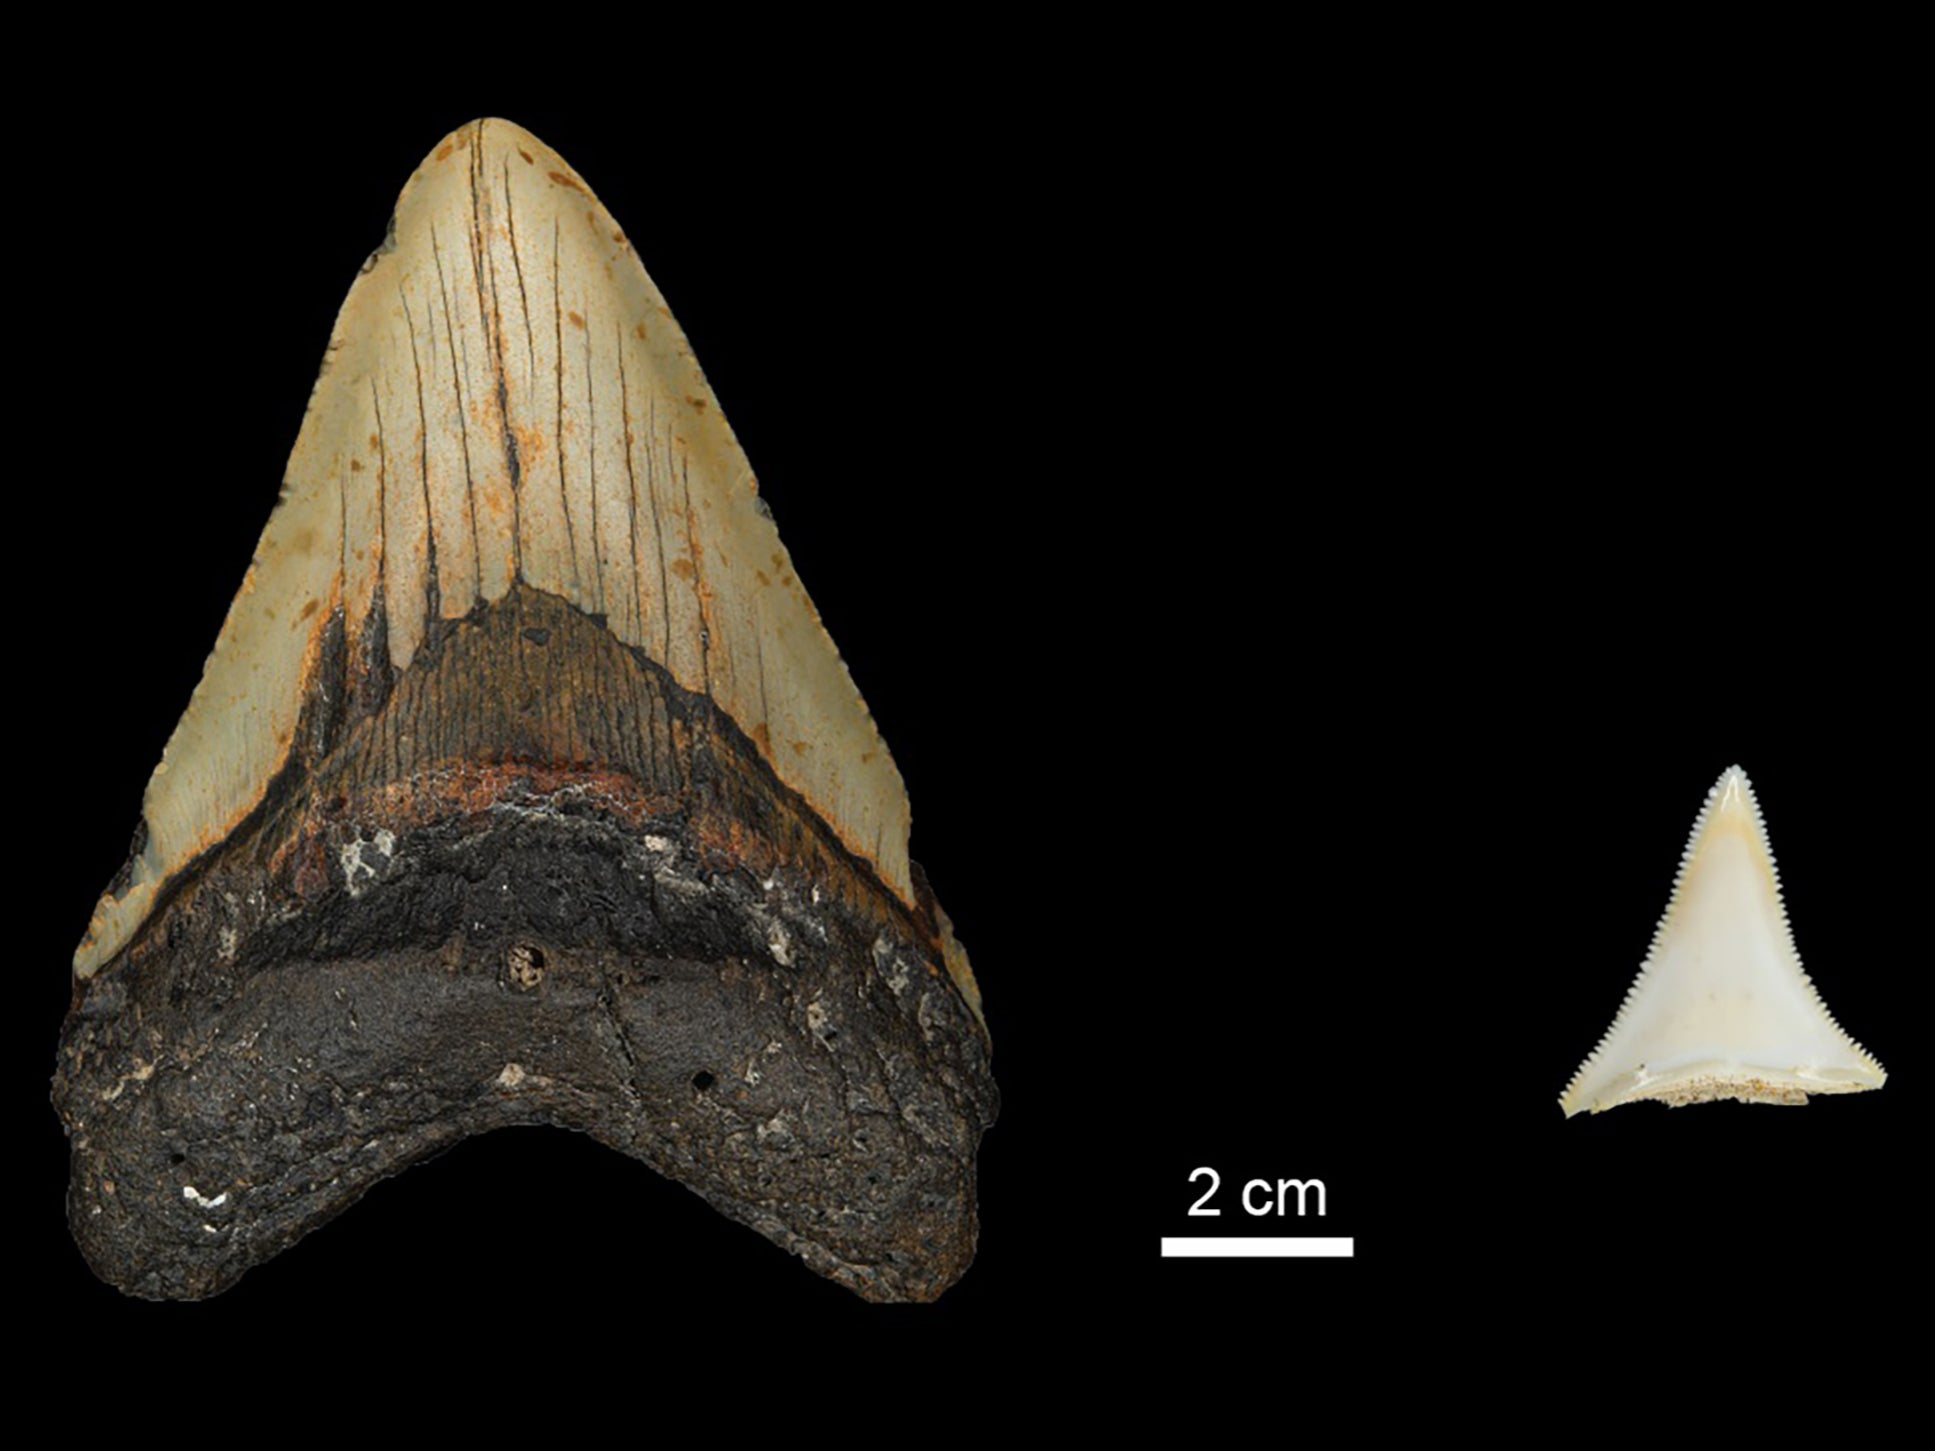 Megalodon could weigh up to 50 tons and reach 65ft in length